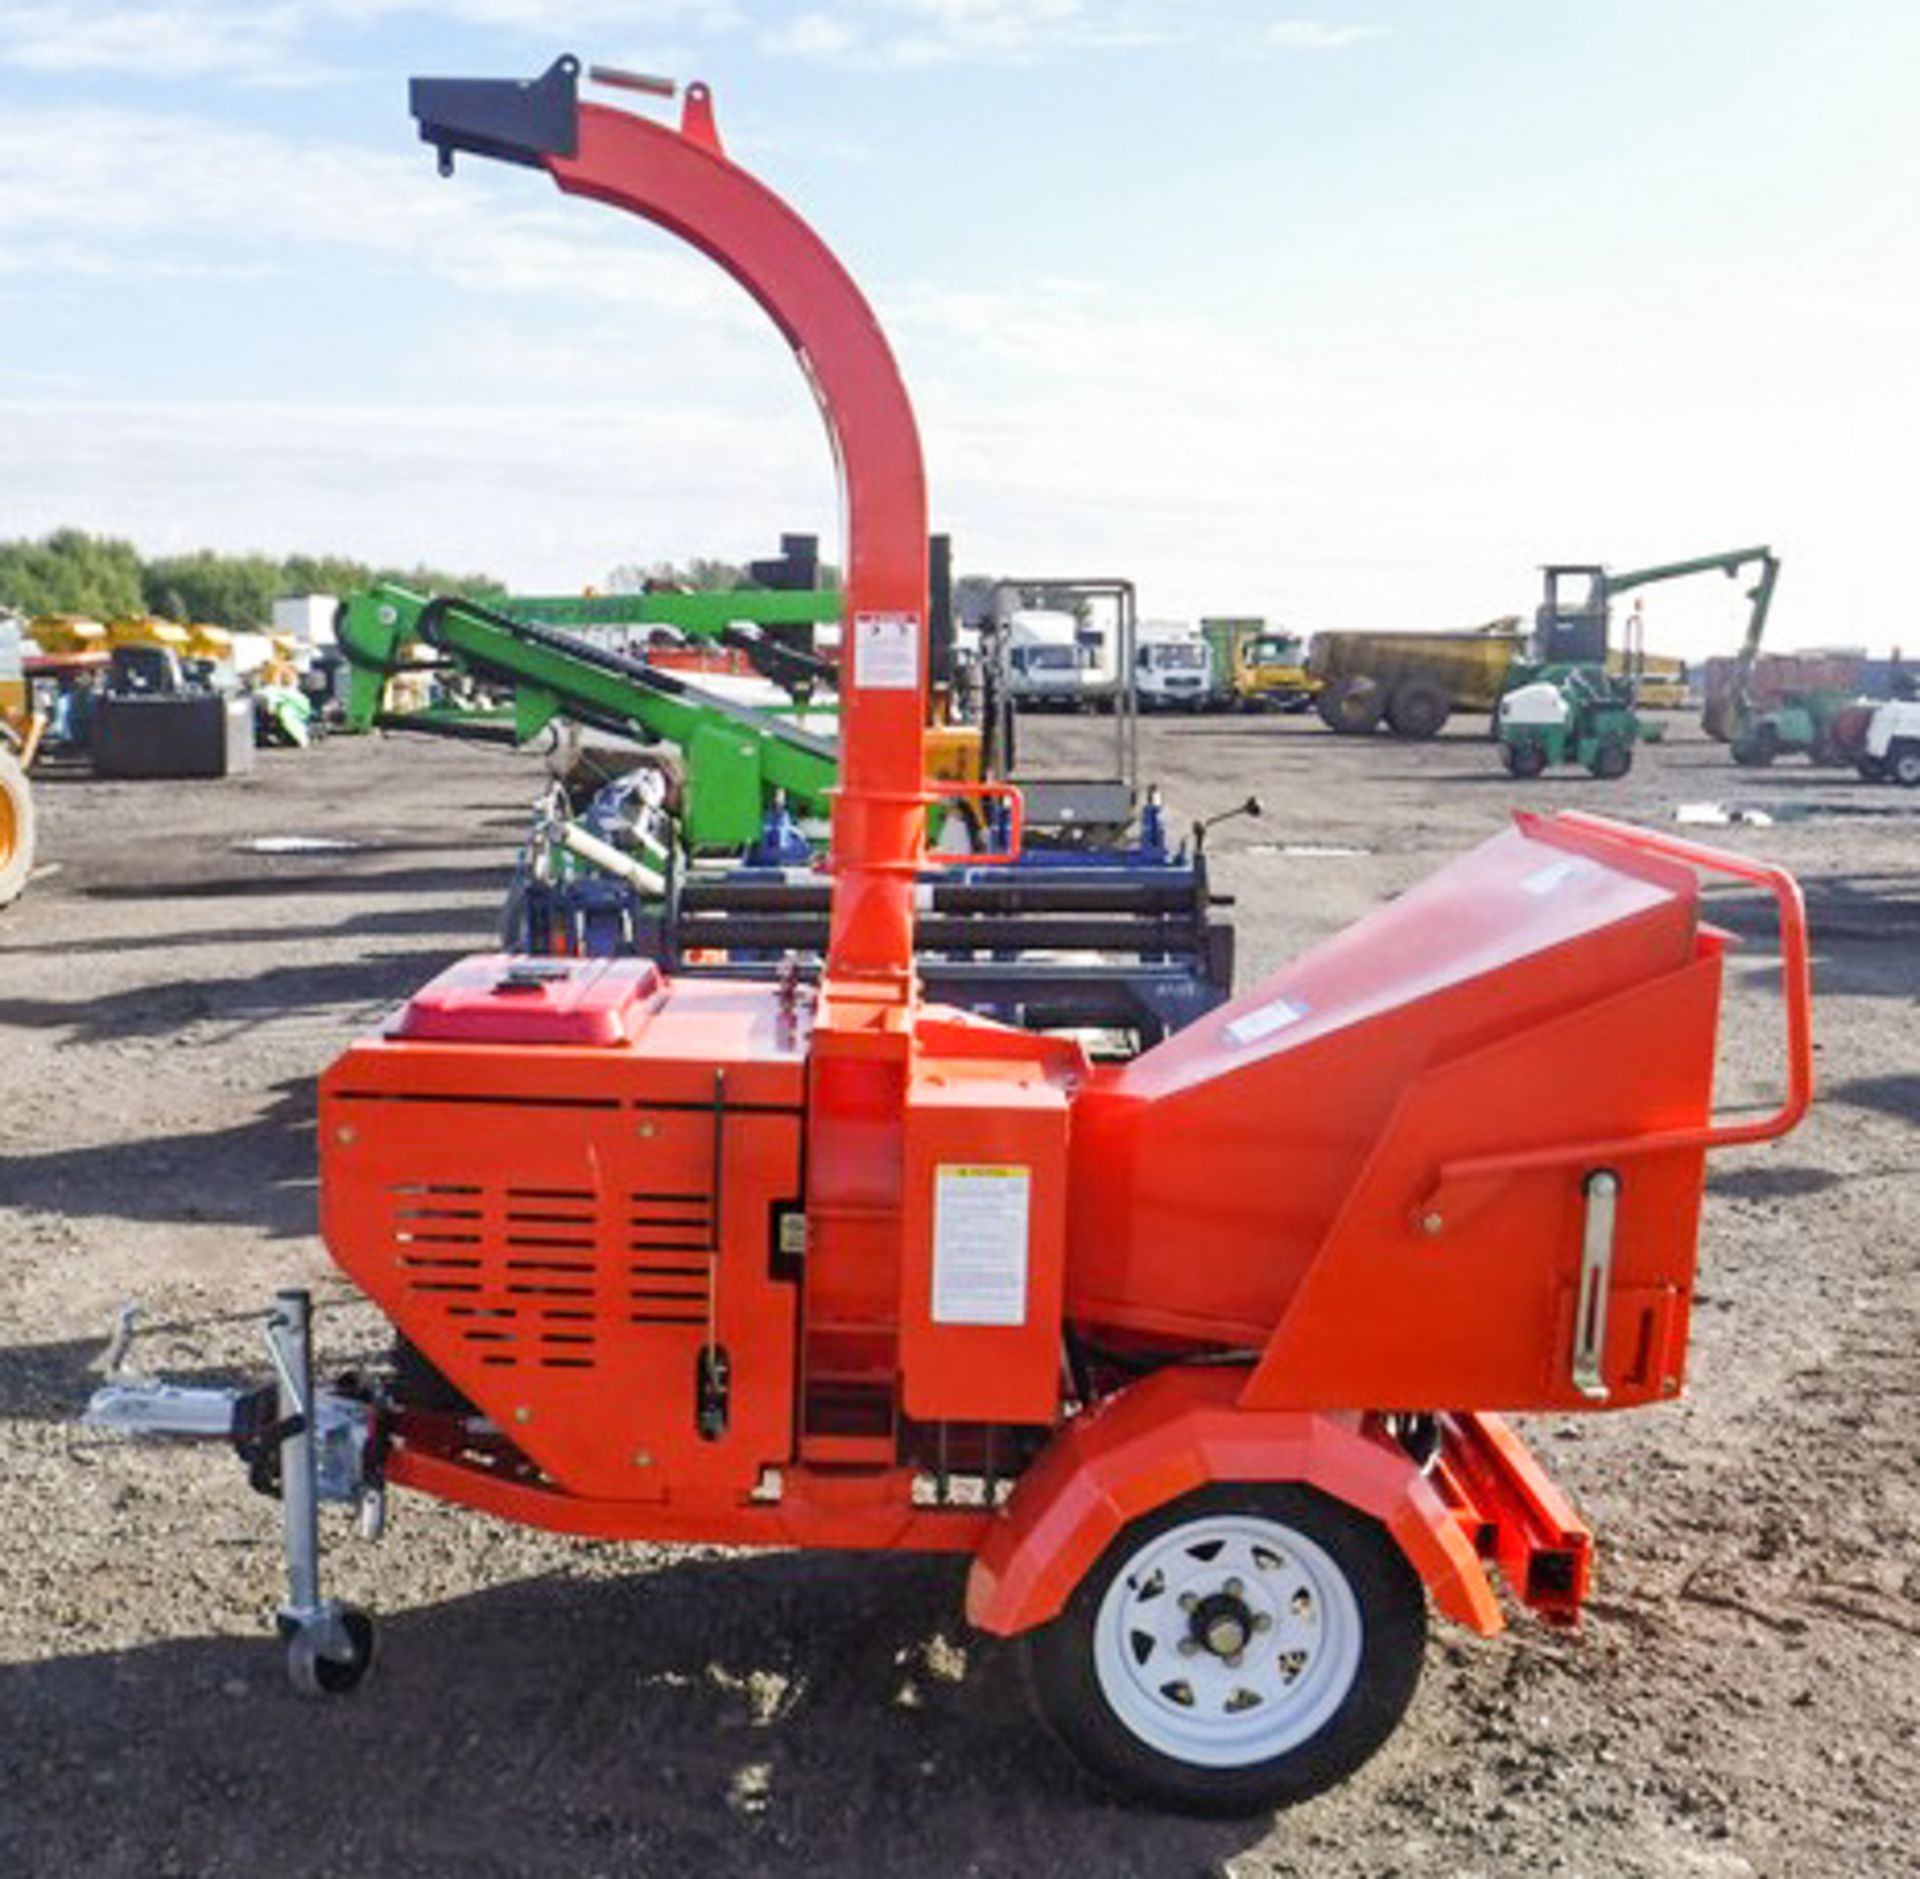 FHM 25HP CHIPPER WITH HONDA GX ENGINE, WILL CHIP BRANCHES UP TO 6' - Image 2 of 6